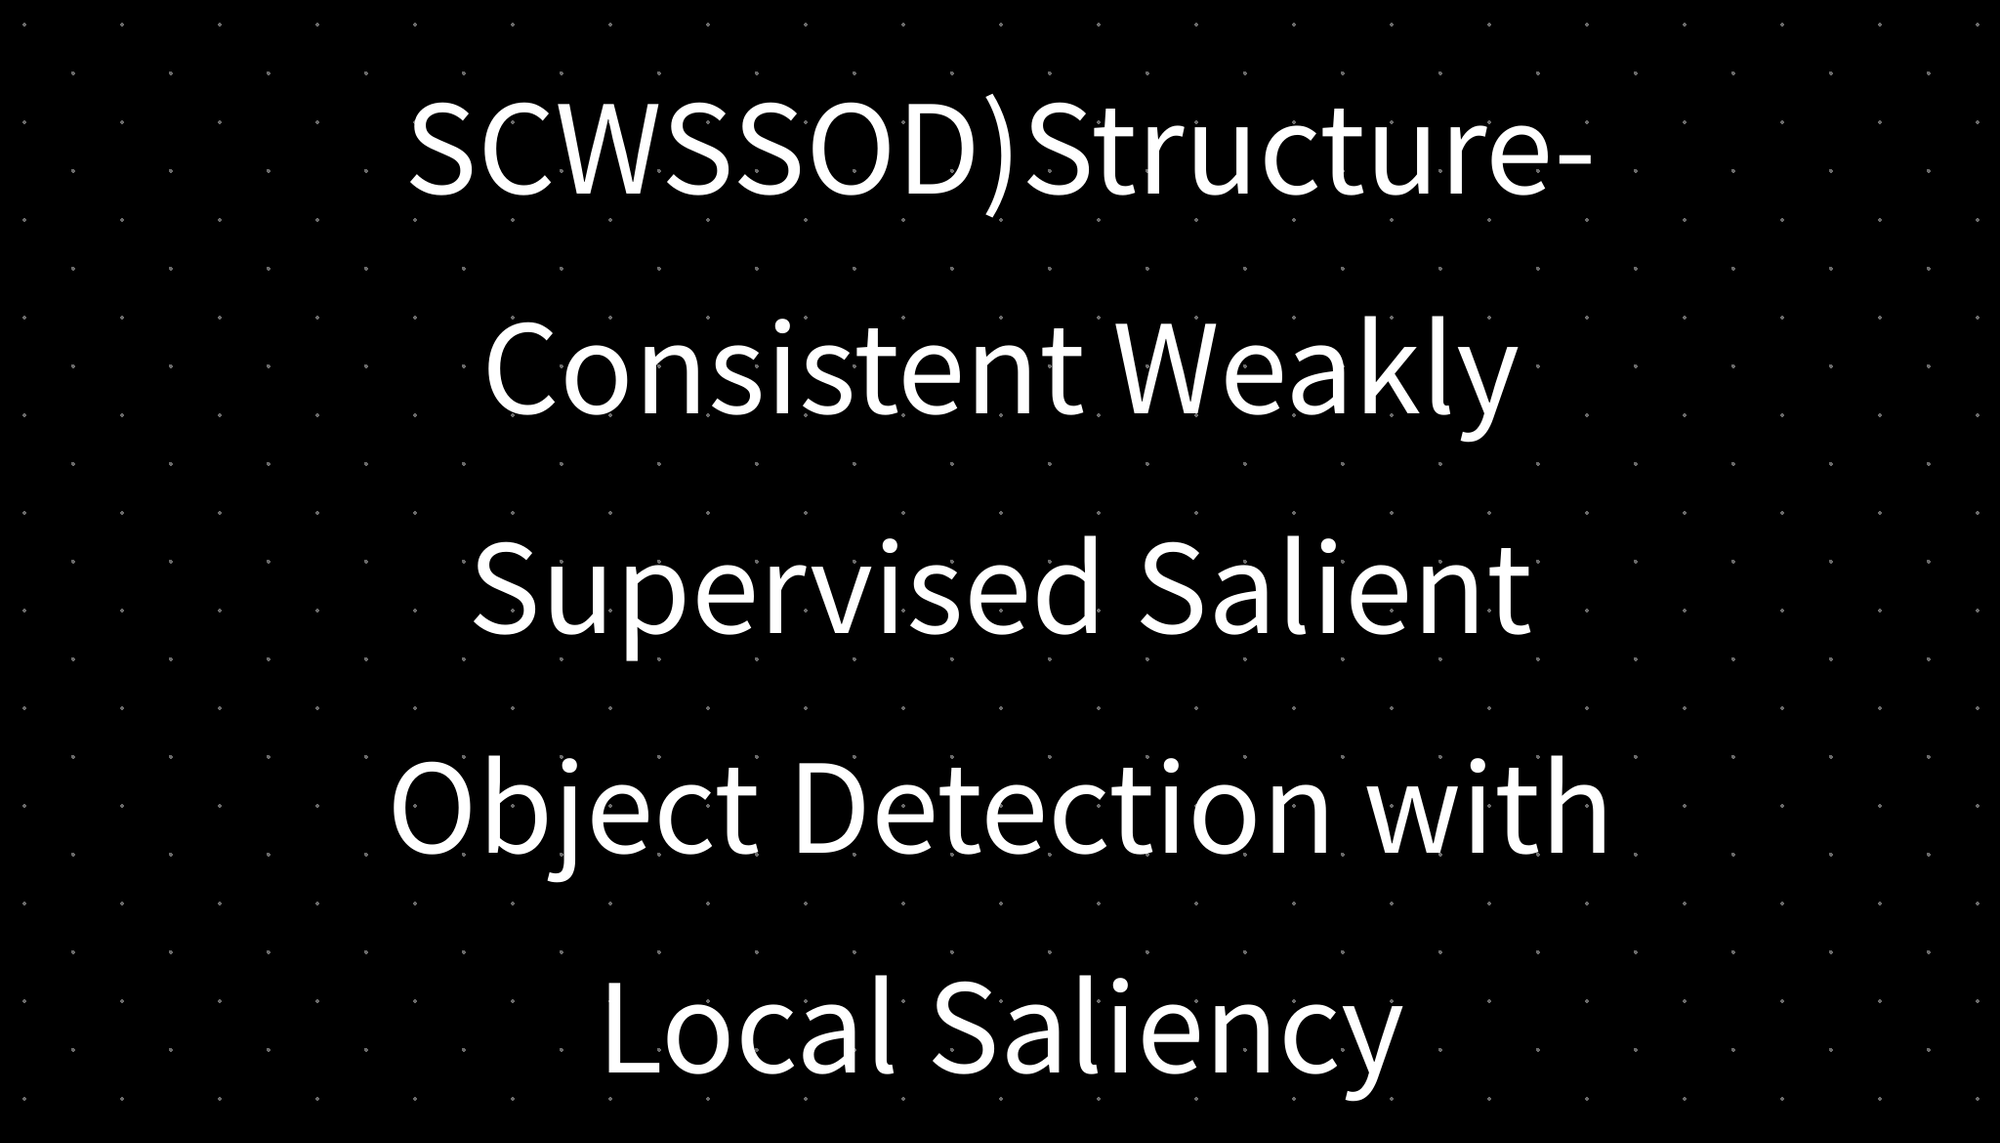 (AAAI2021-SCWSSOD)Structure-Consistent Weakly Supervised Salient Object Detection with Local Saliency Coherence 论文阅读